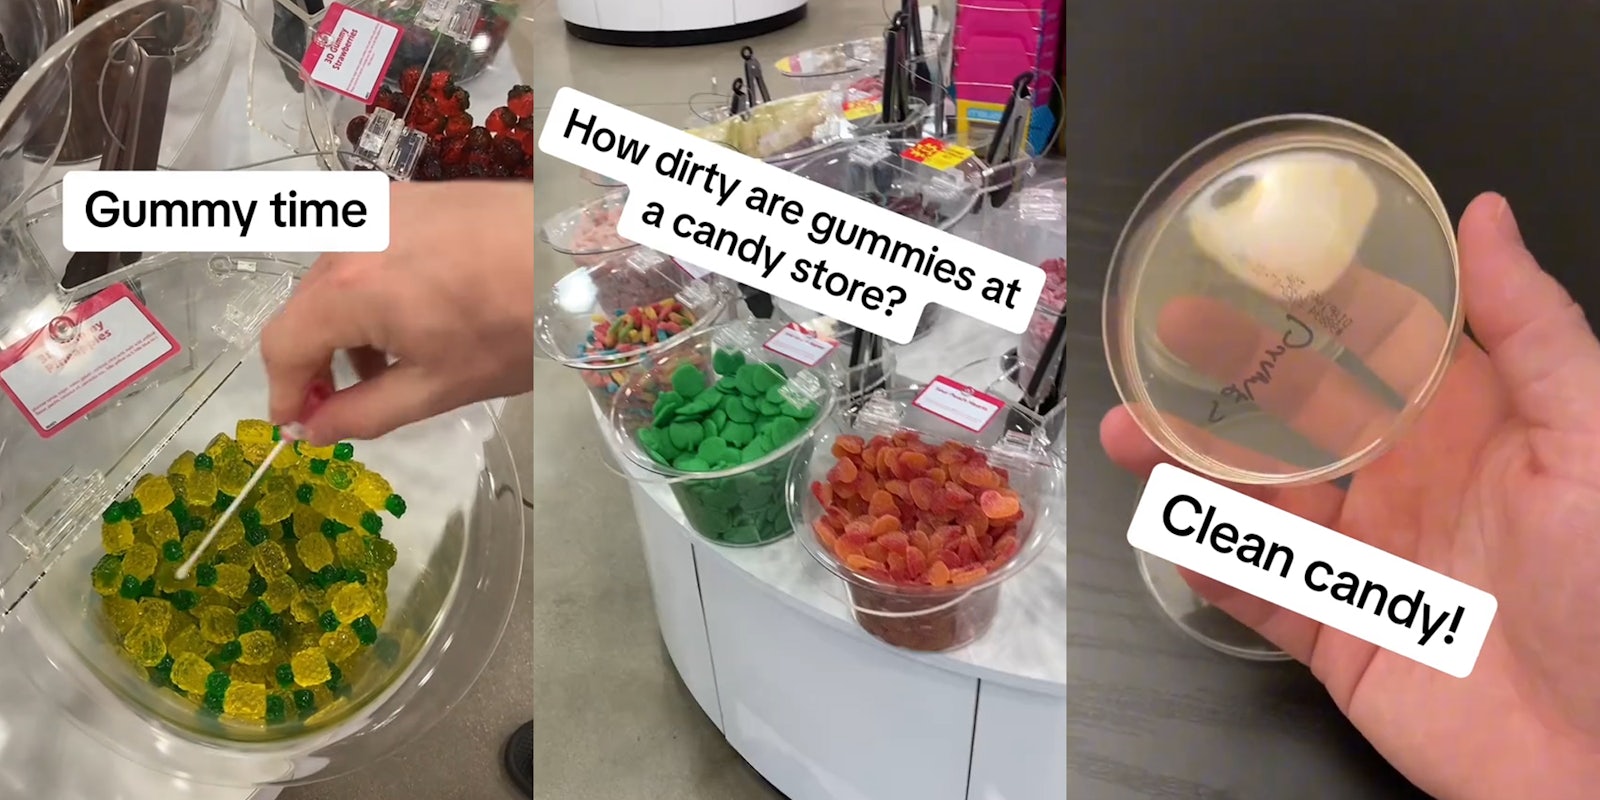 person swabbing candy store gummy bowl with caption 'Gummy time' (l) candy on display at candy store with caption 'How dirty are gummies at a candy store?' (c) clean petri dish in hand with caption 'Clean candy!' (r)